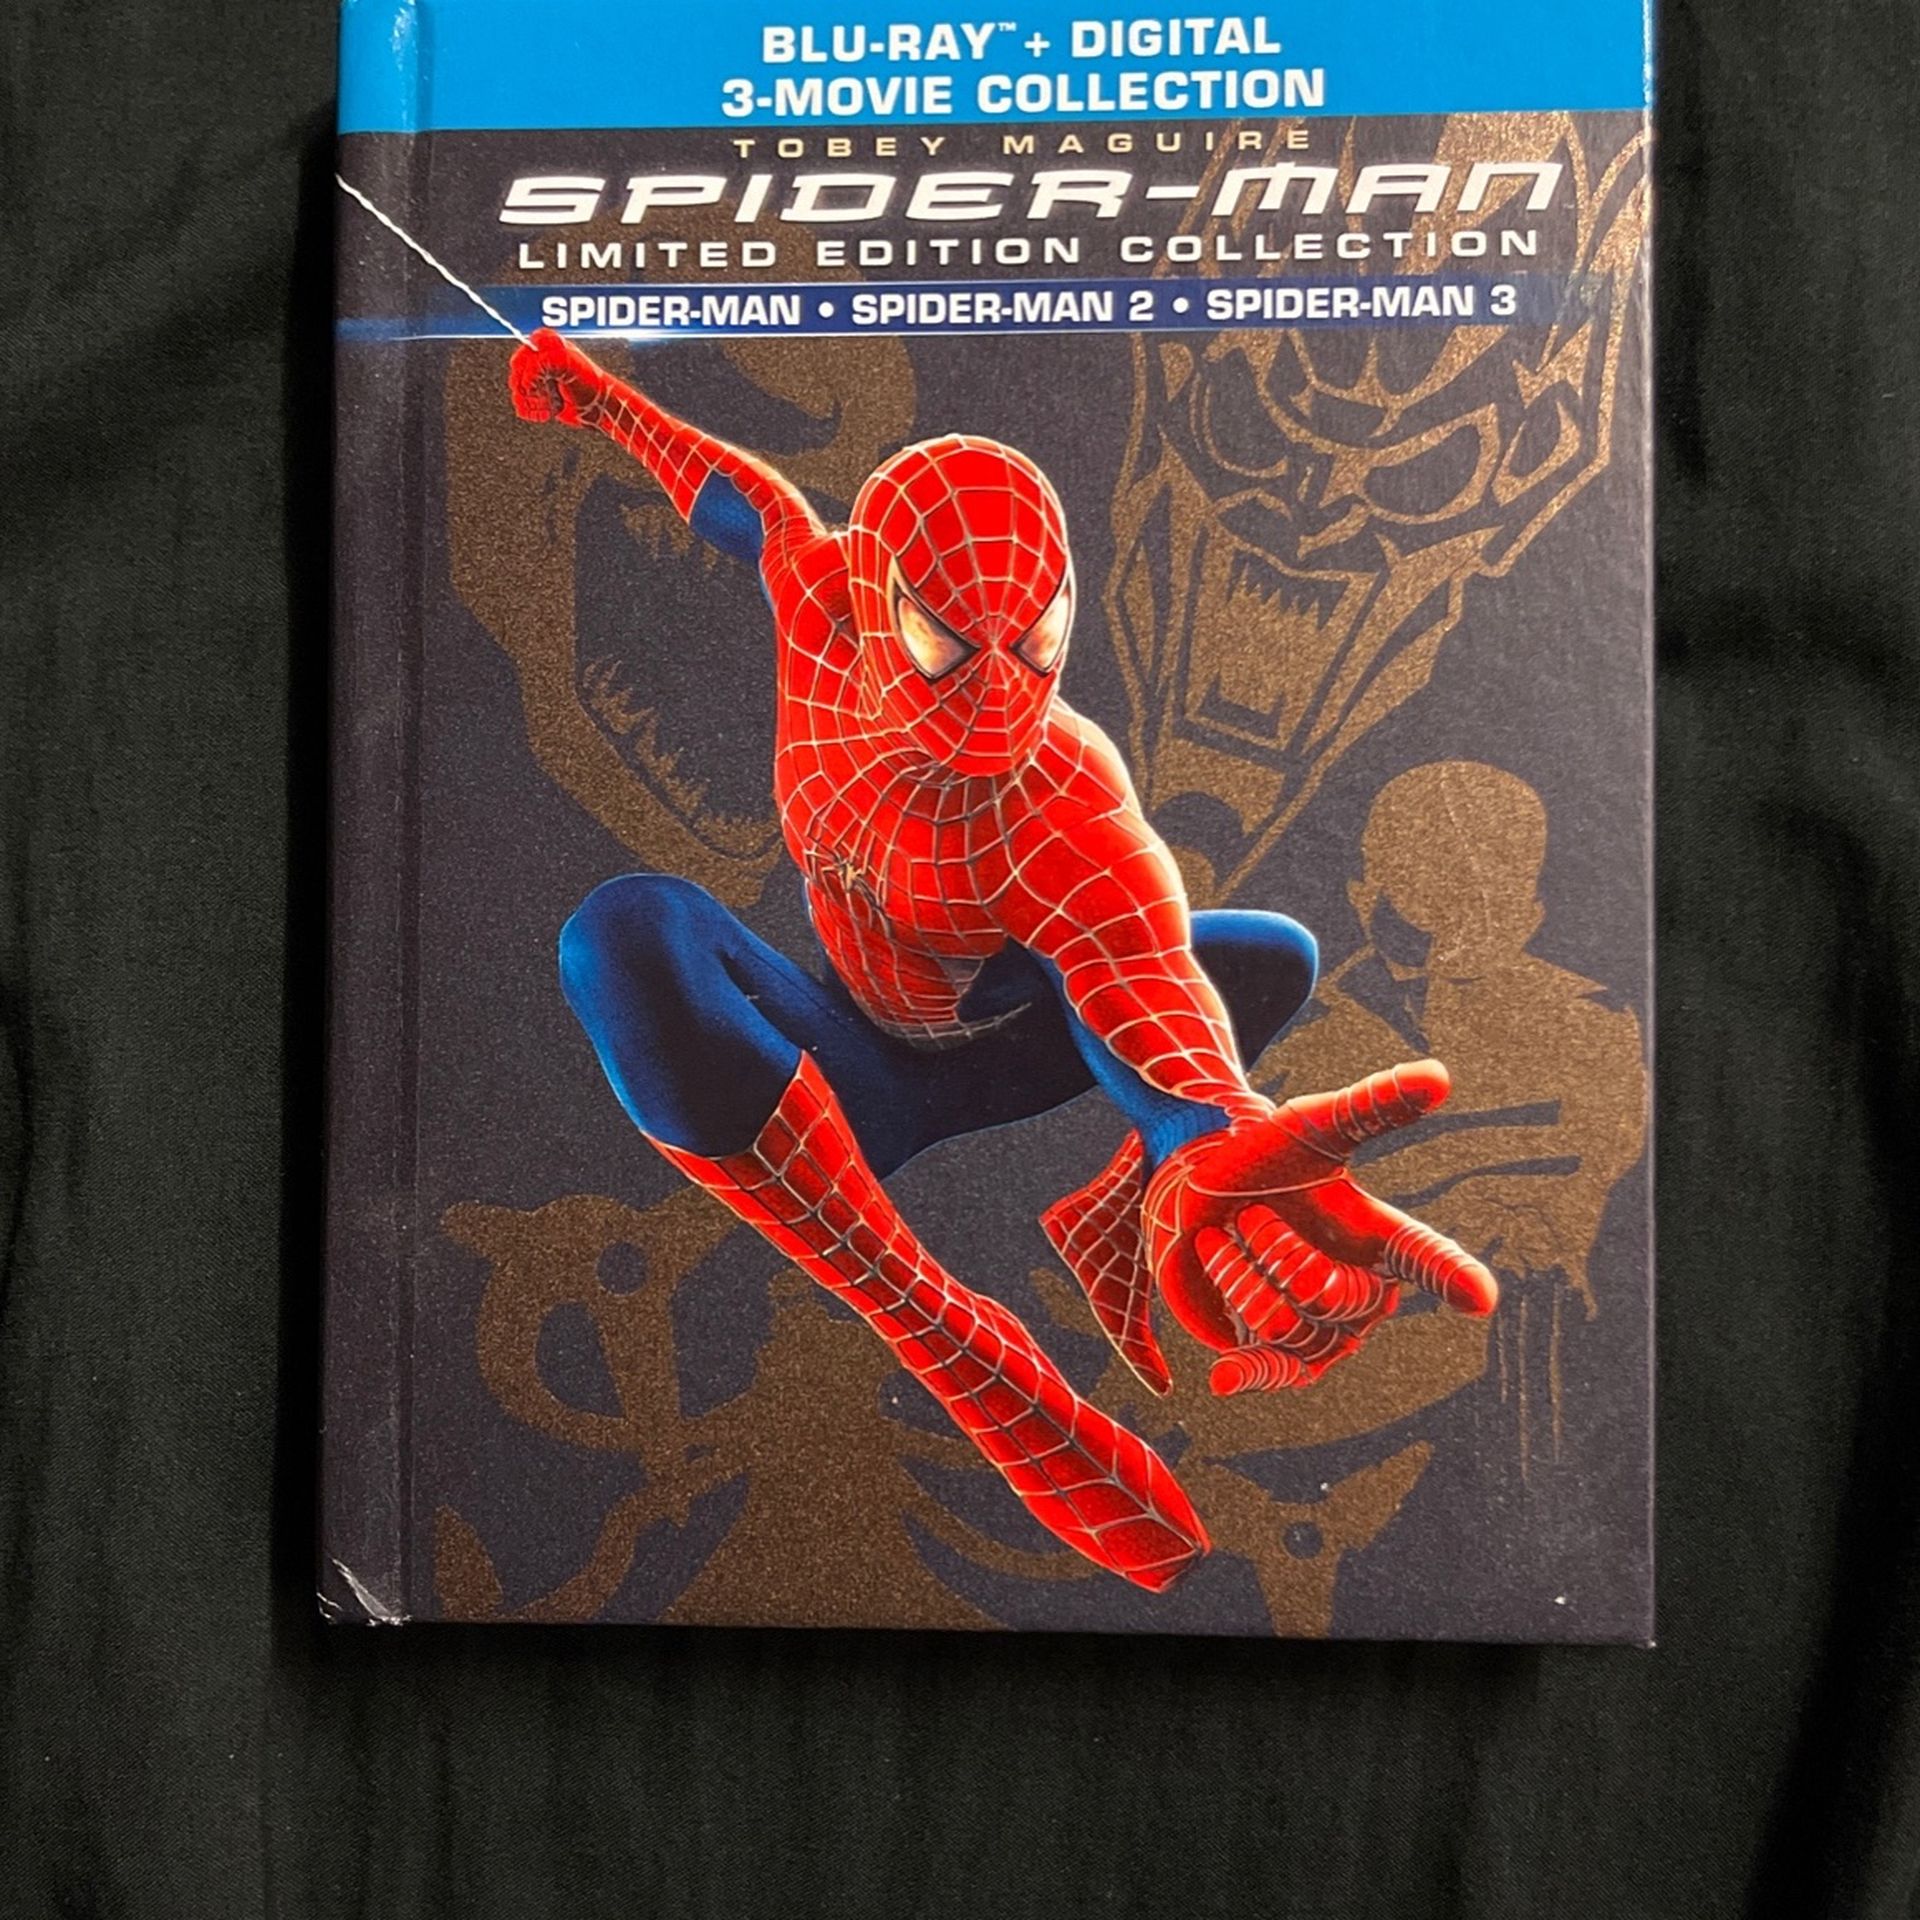 Spider-Man Limited Edition Collection Blu Ray (No Digital Code)